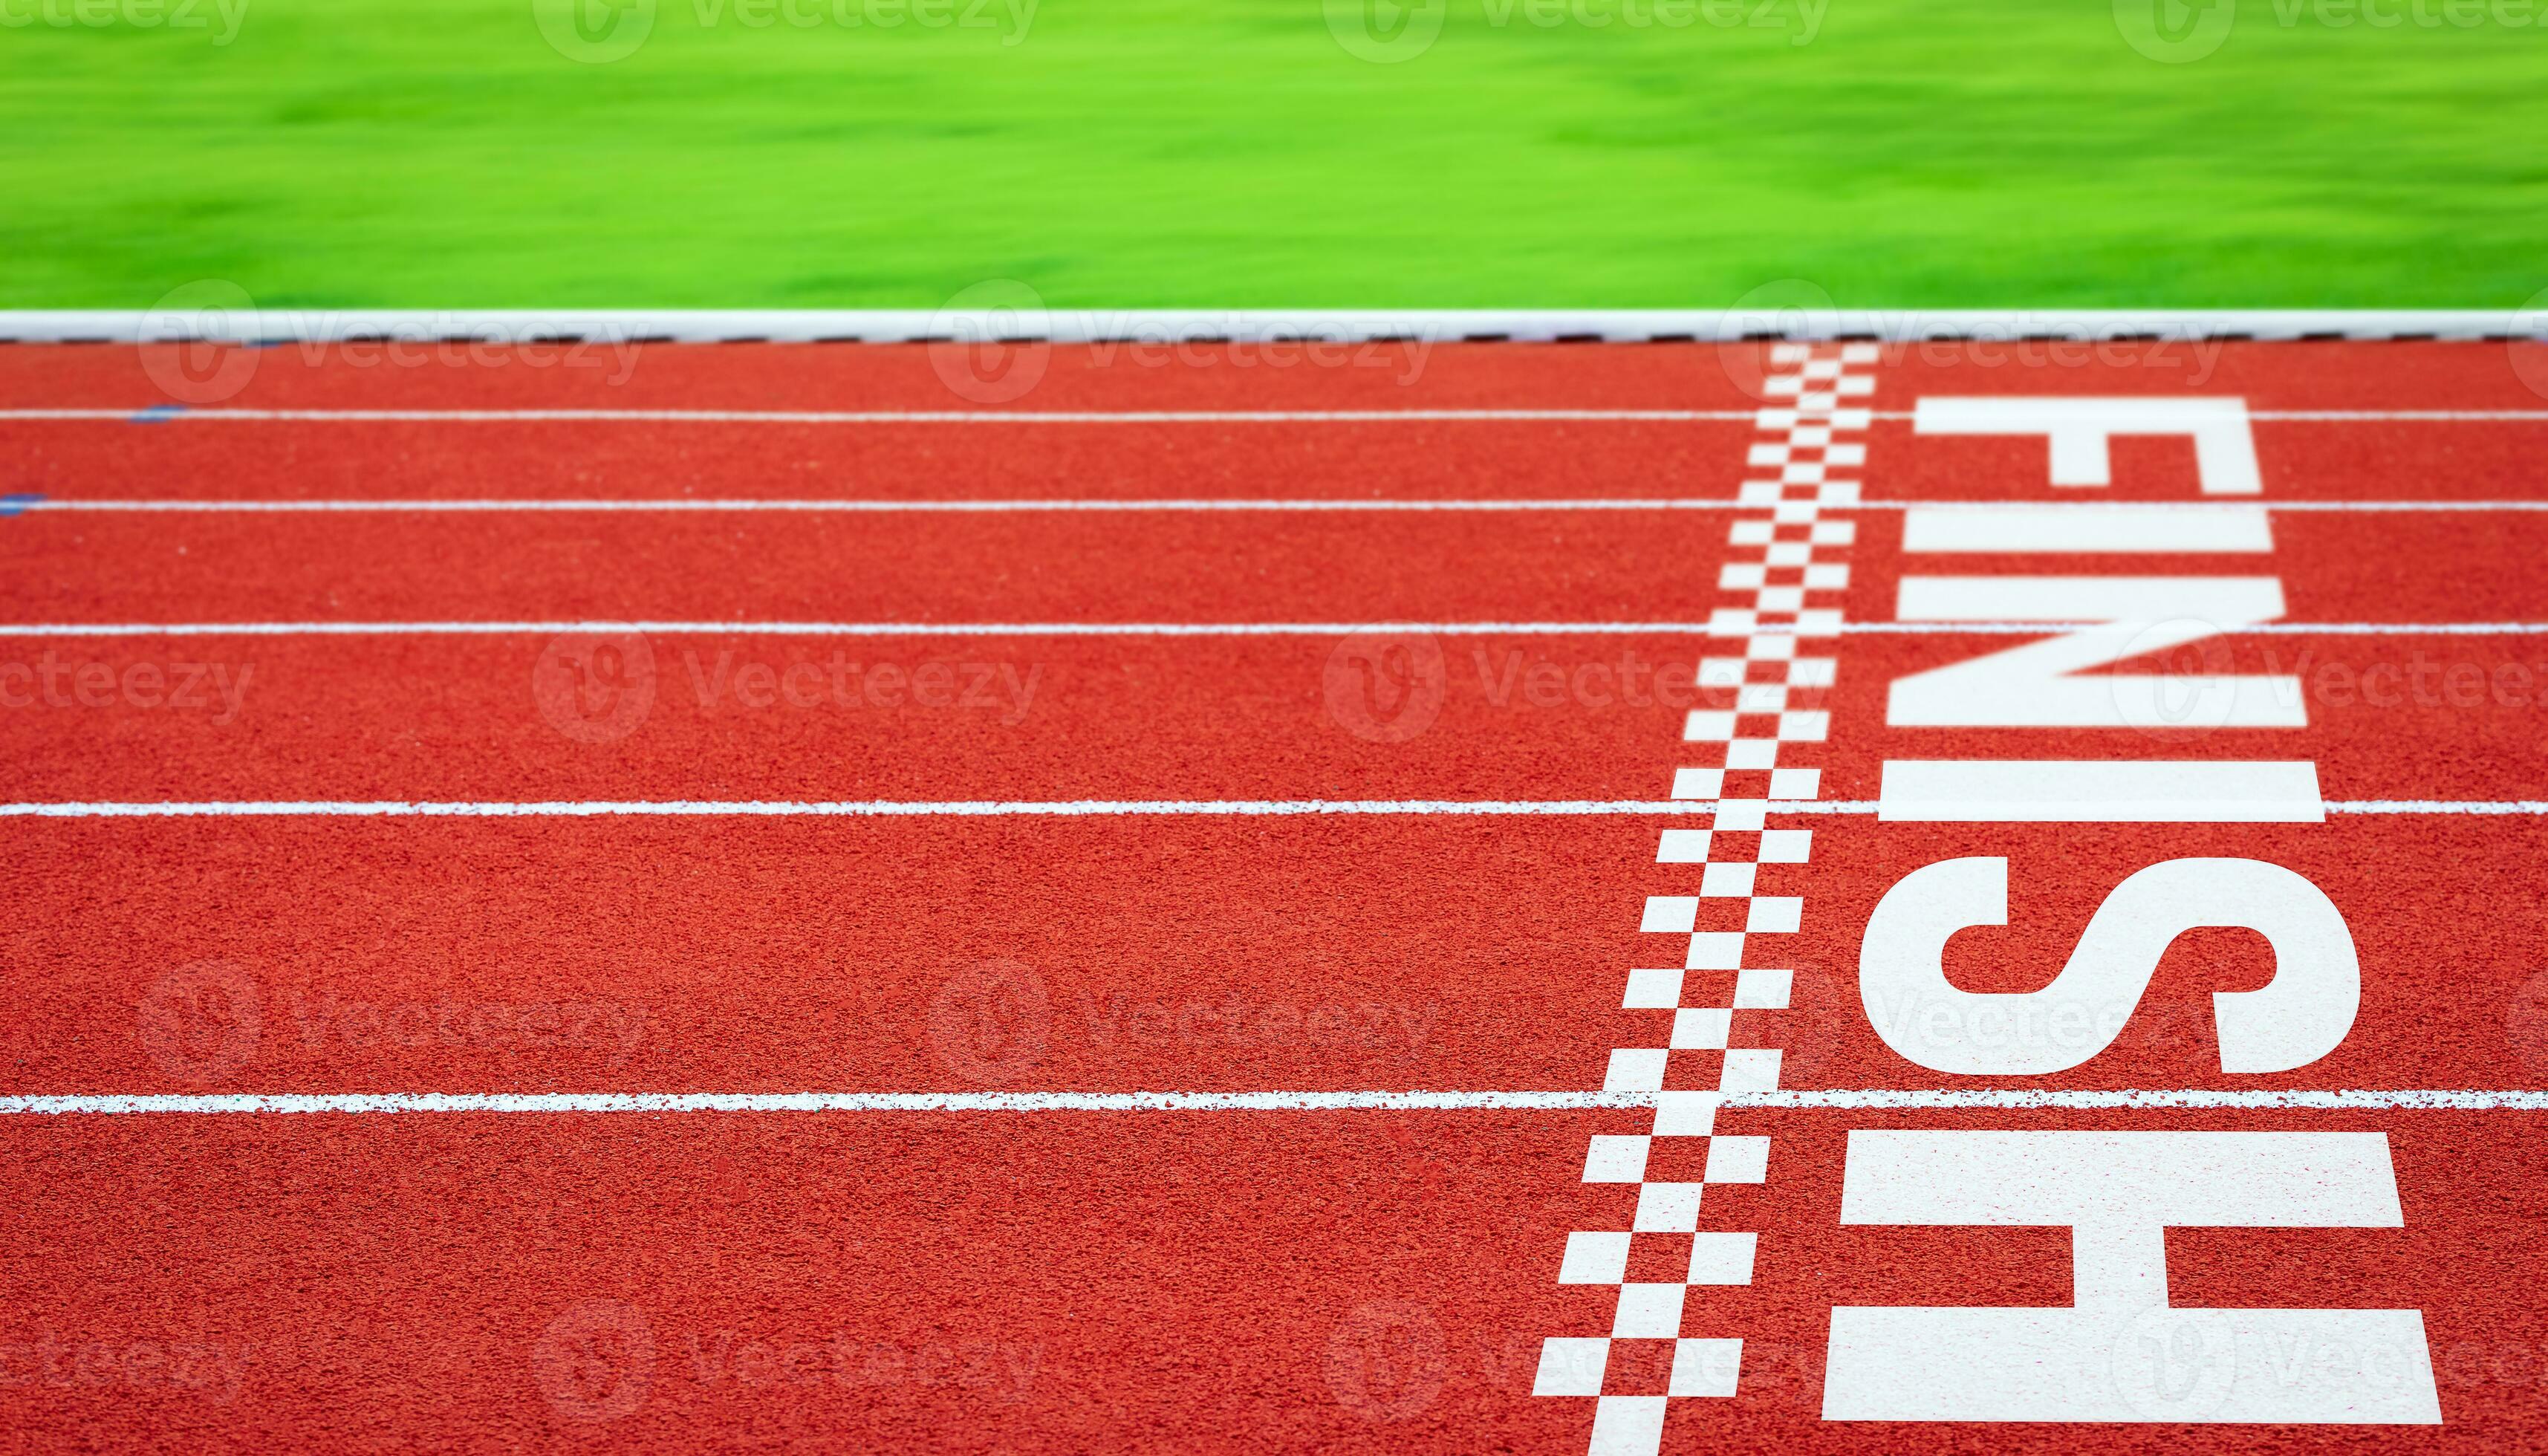 Forward to finish line on Running track. Concept of Business